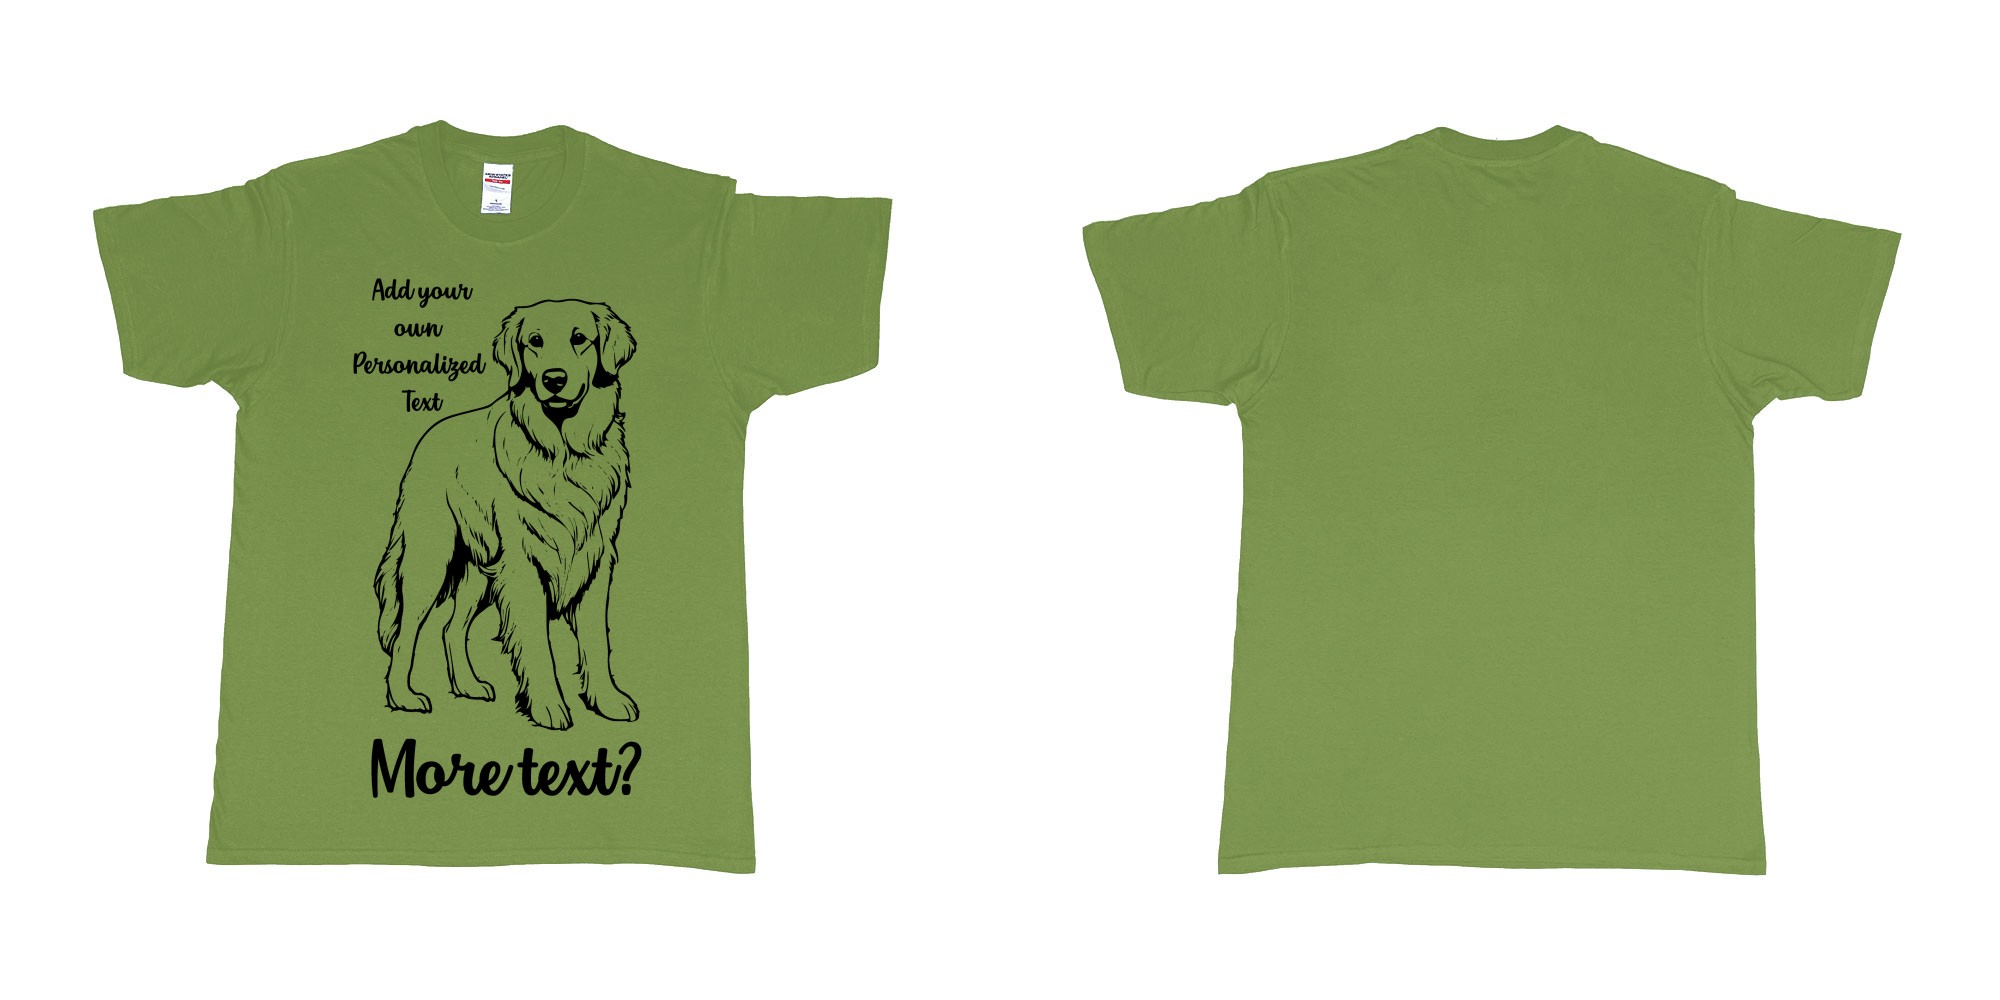 Custom tshirt design golden retriever dog breed personalized text in fabric color military-green choice your own text made in Bali by The Pirate Way